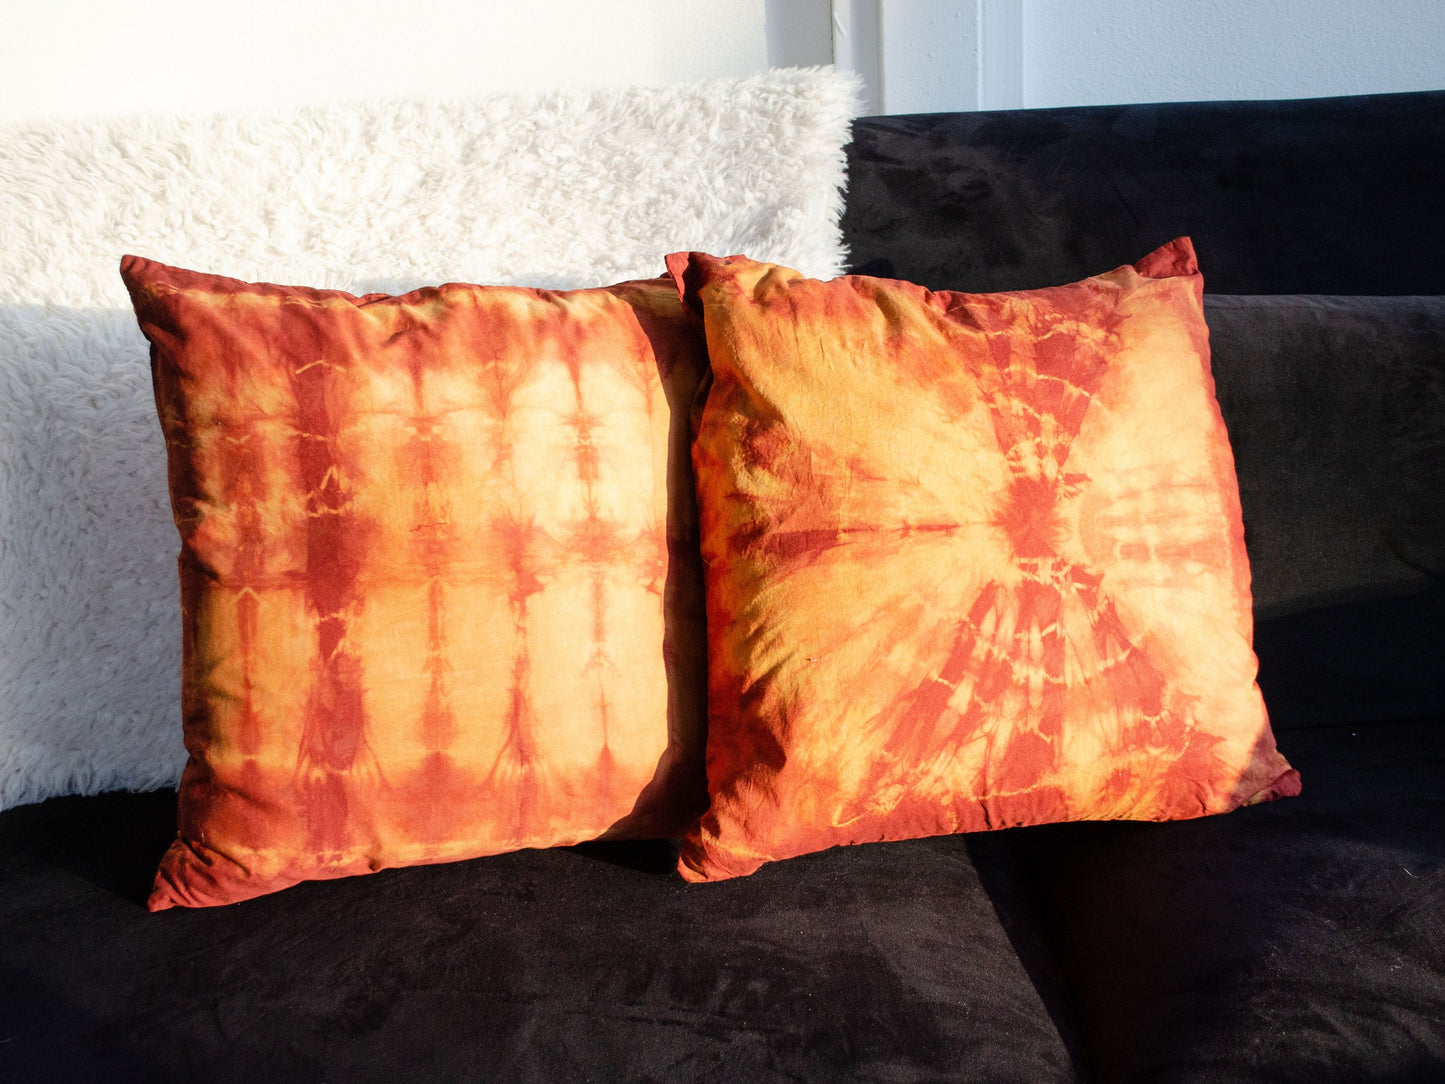 2 Hand-Dyed Pillowcases - Tie Dye Pillowcases in Lava Rock Colors by 1 Life